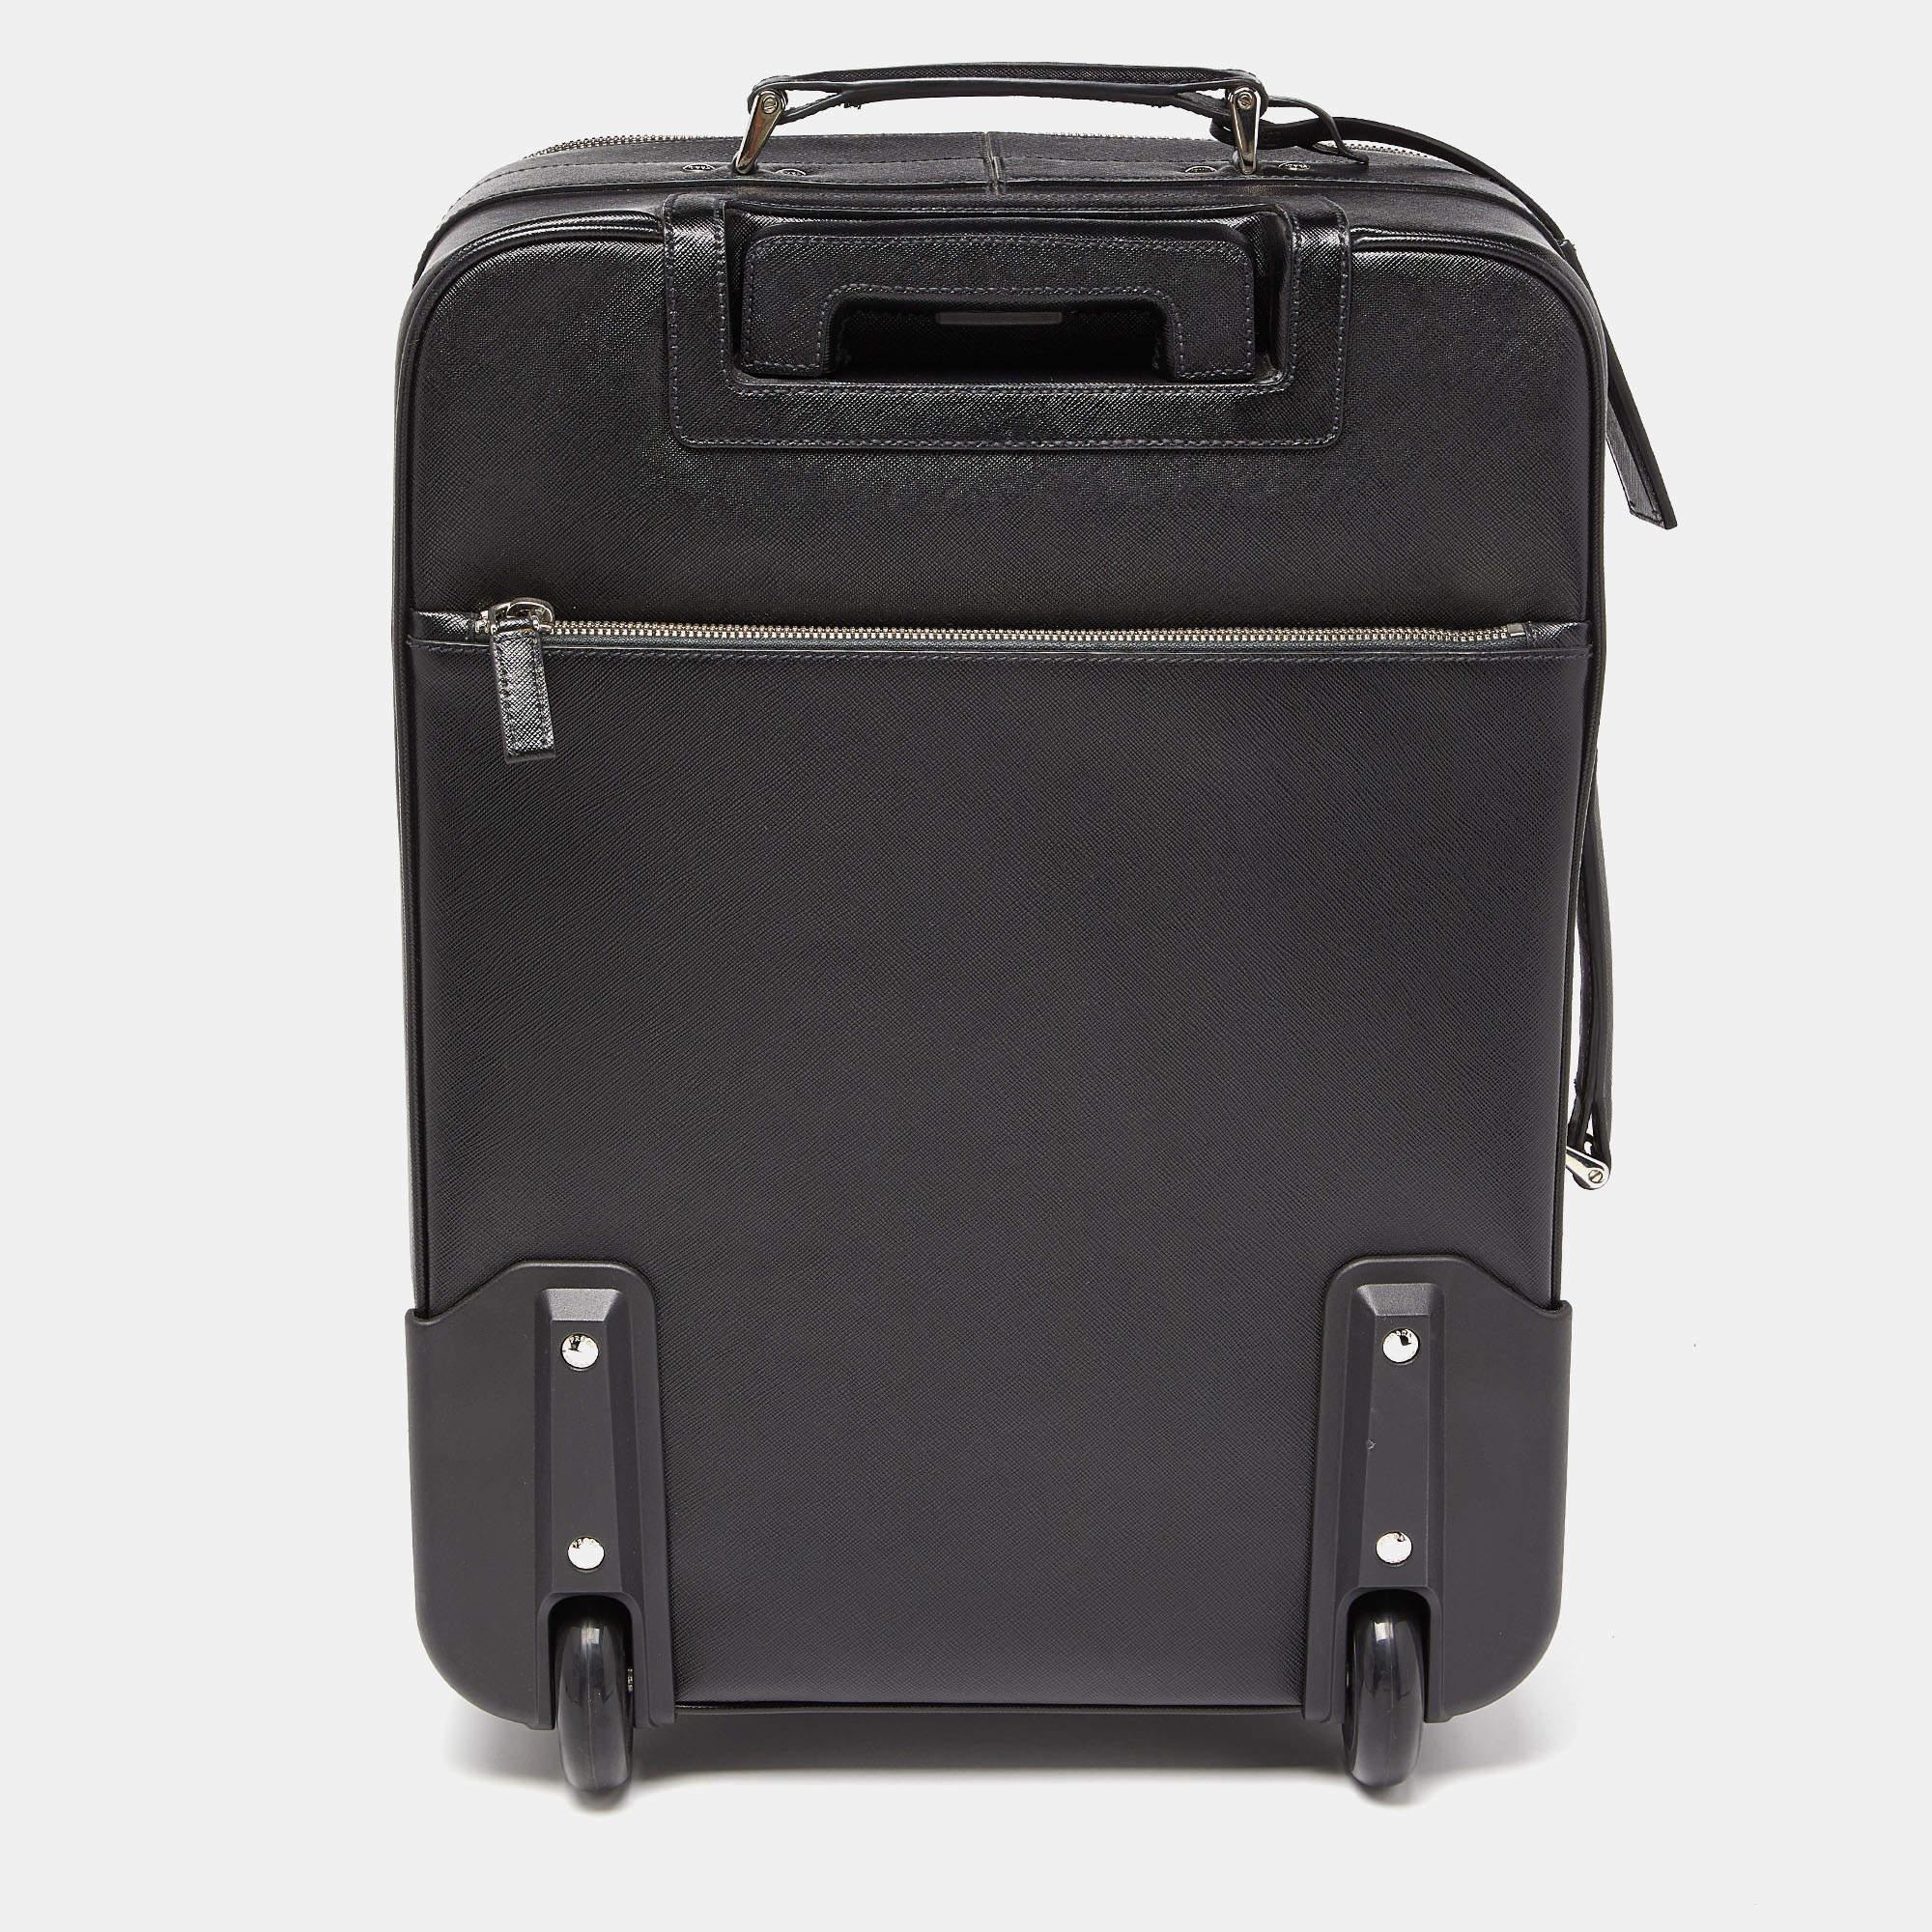  Say hello to your new traveling partner from Prada. The exterior has been crafted from Saffiano leather while the spacious interior is lined with nylon. Equipped with a zip pocket at the front, a flat handle, two wheels, and a telescopic cane, this